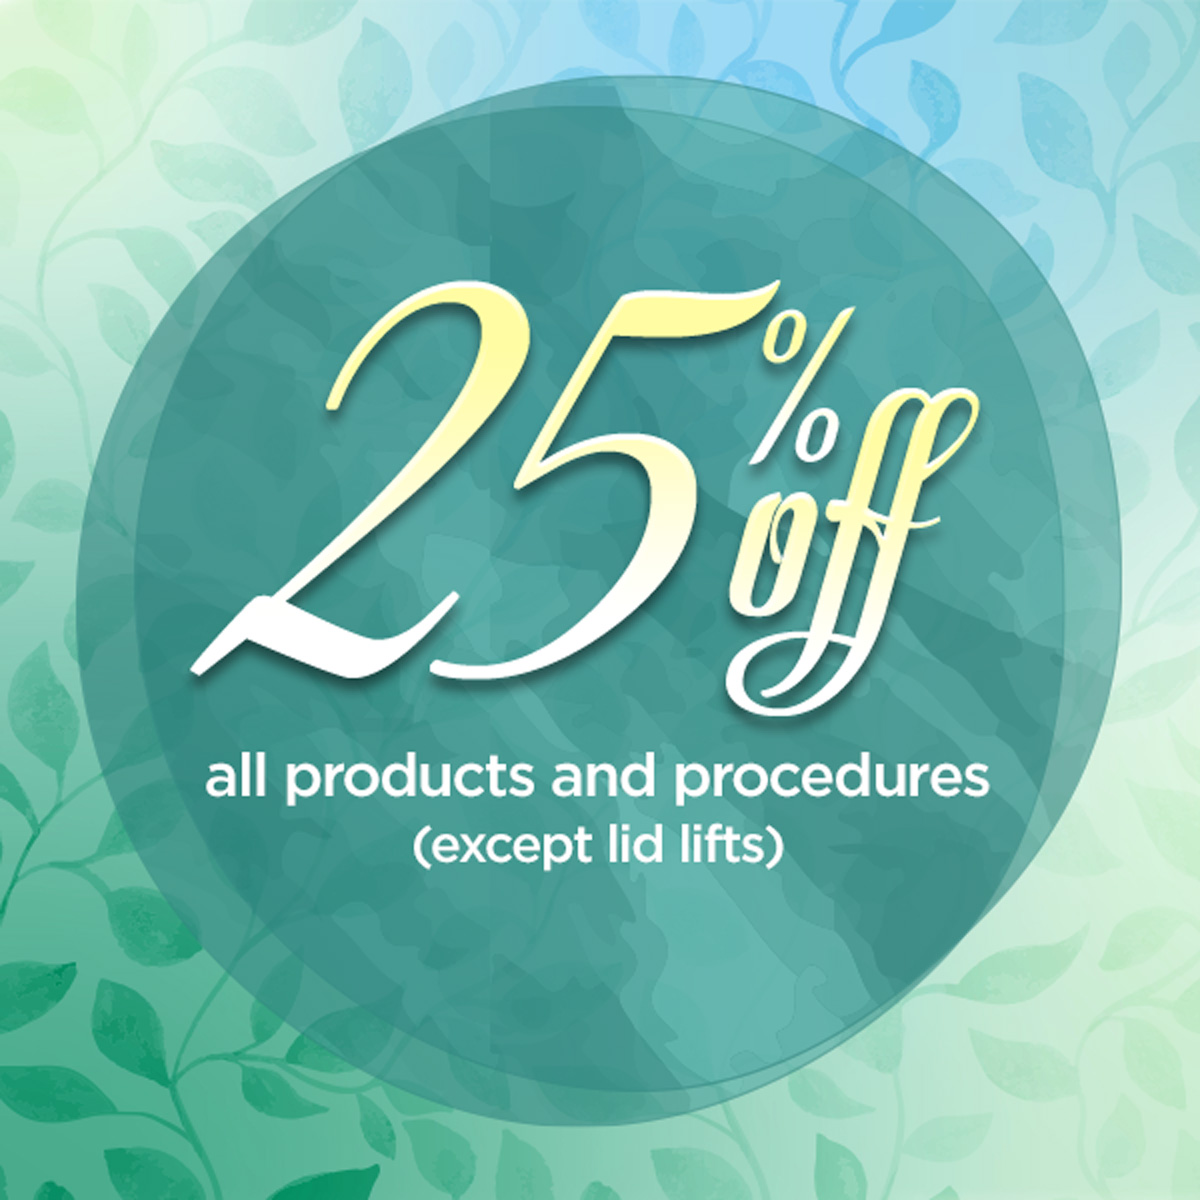 25% off all products and procedures; except lid lifts.